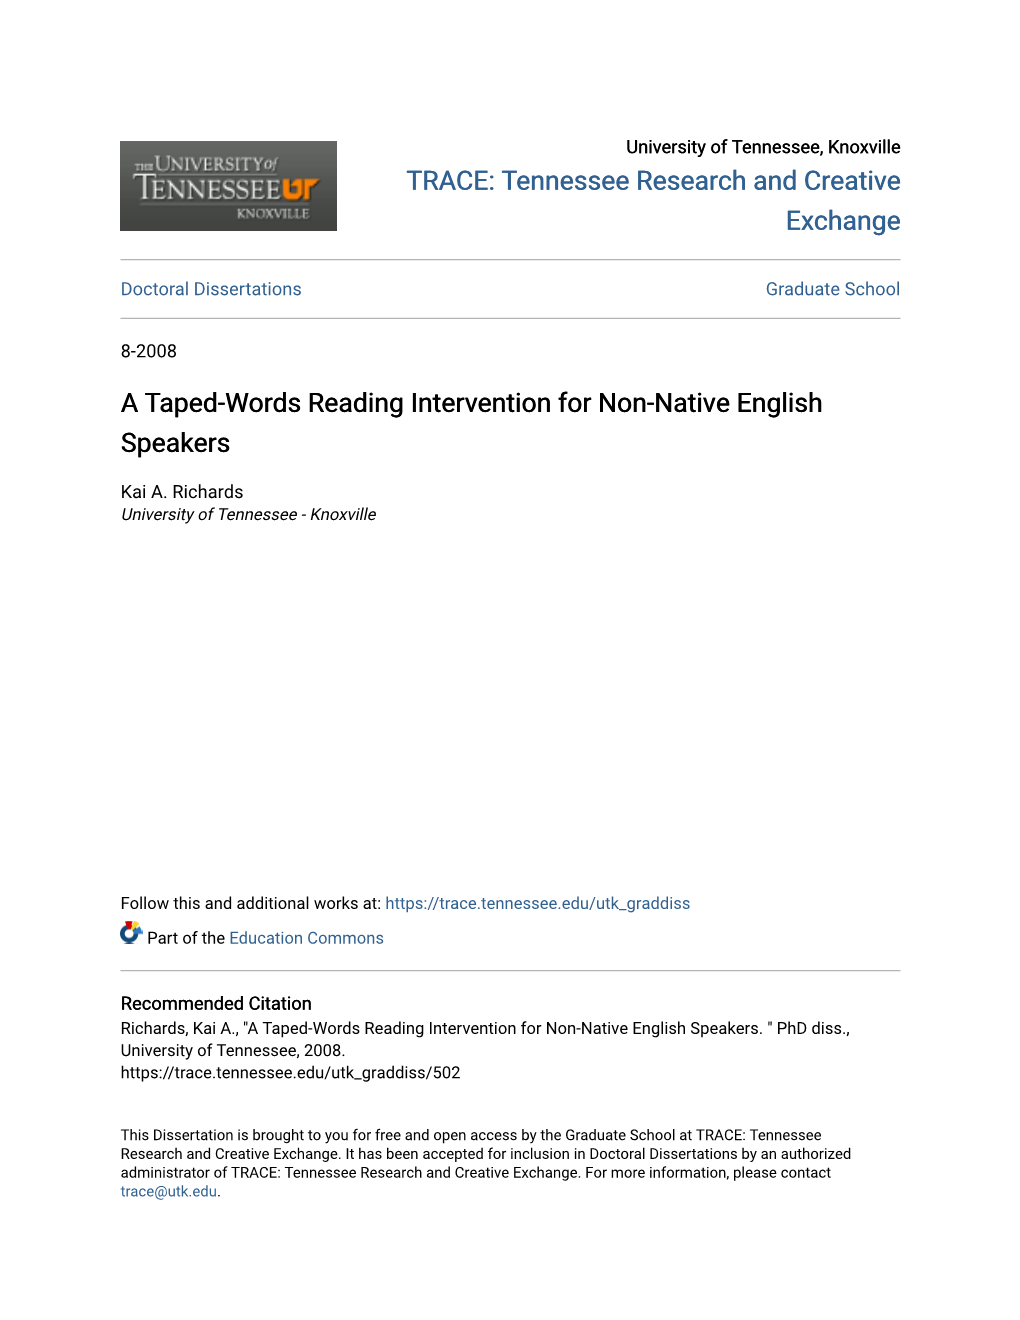 A Taped-Words Reading Intervention for Non-Native English Speakers